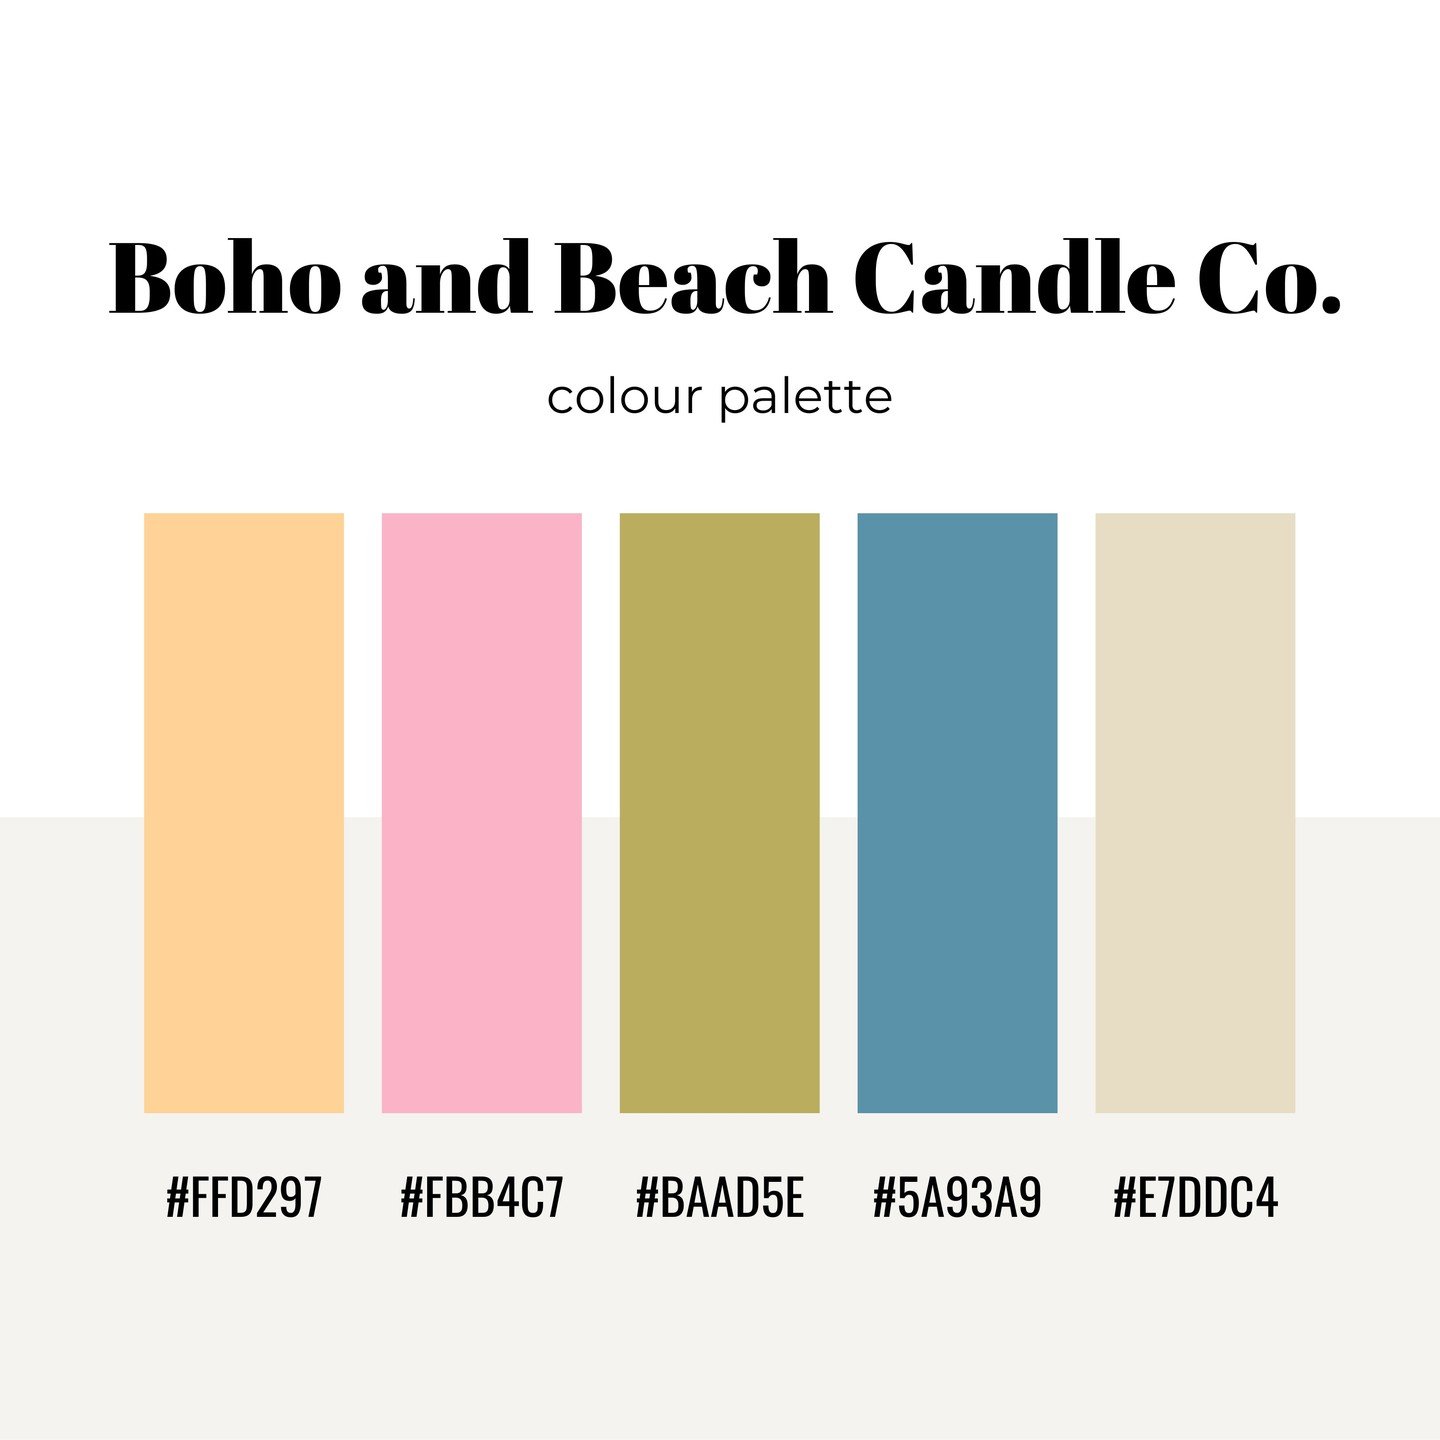 Our Color Palette #candlesandcolors #colorpalette #colorpalettes #brandidentity #branddesign #candlebranding #candlebrand #localbrands #localbranding #candlepalette #brandingcolor #colorstip #colorsfun #funcolors #candlesarelife #madeindelaware